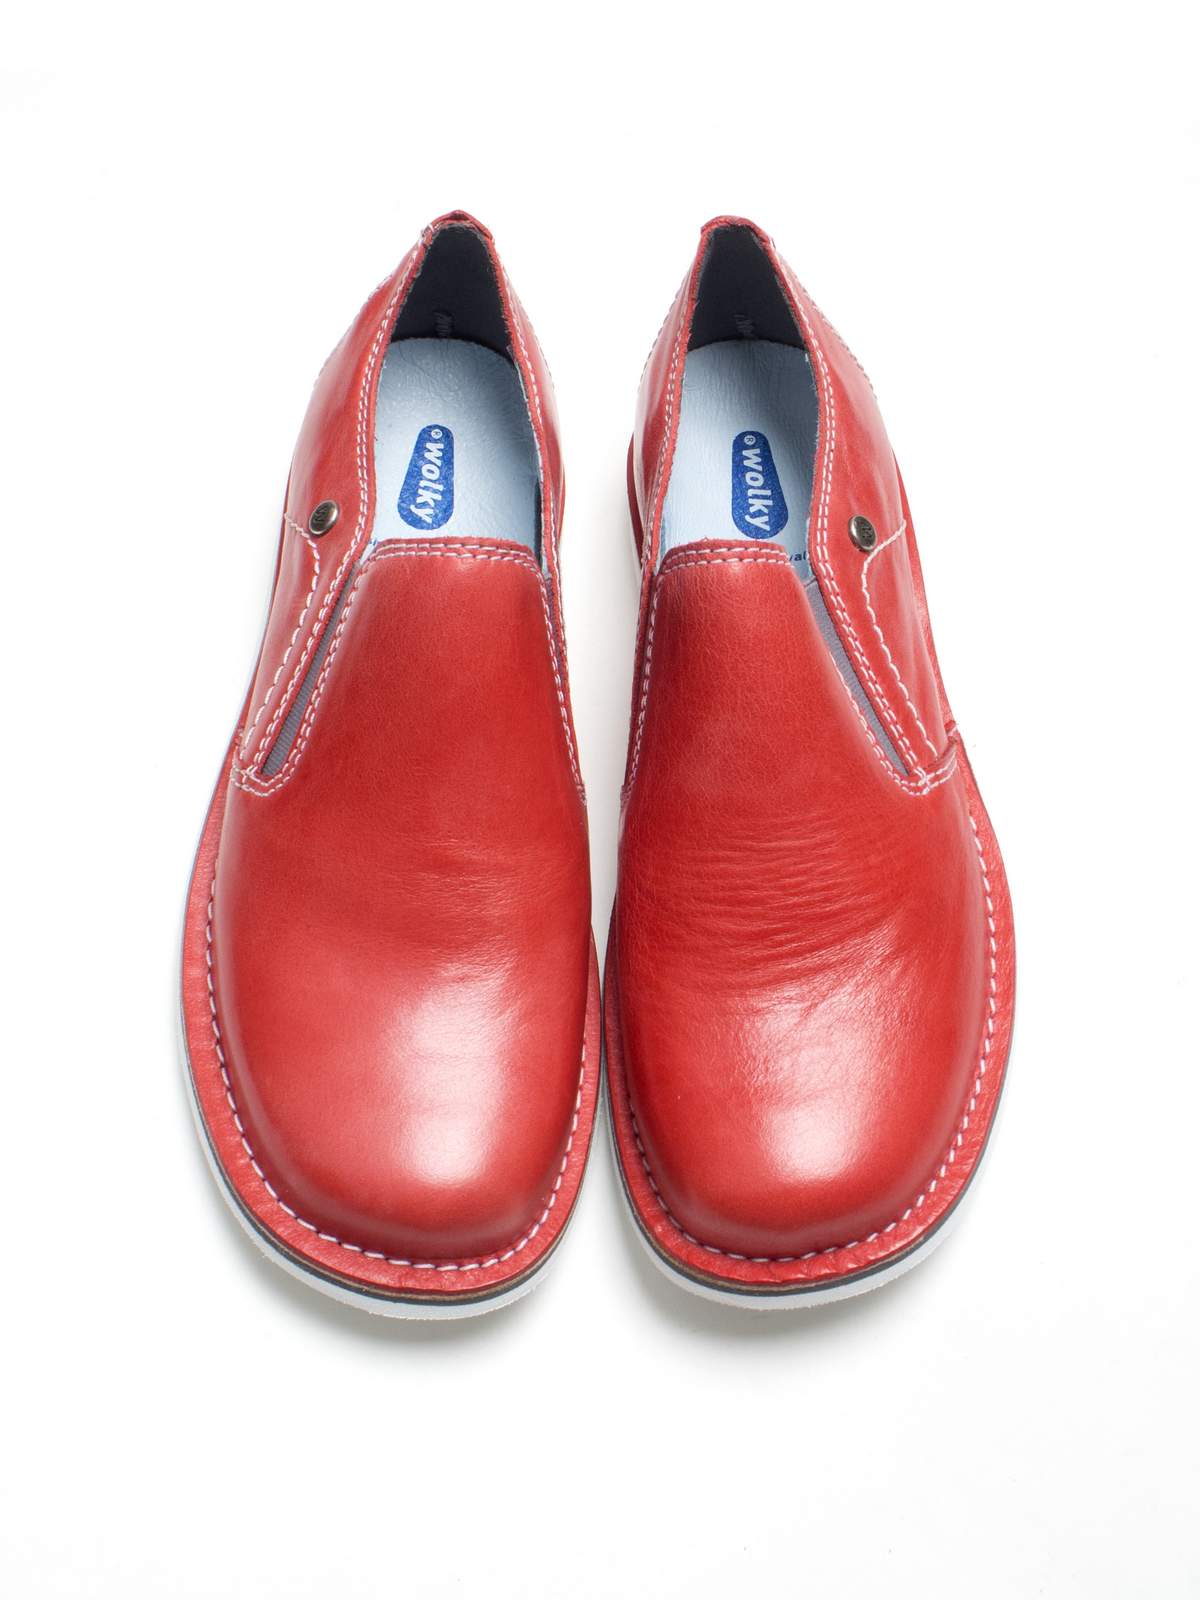 Wolky Shoes Flint Maverick Lux Red